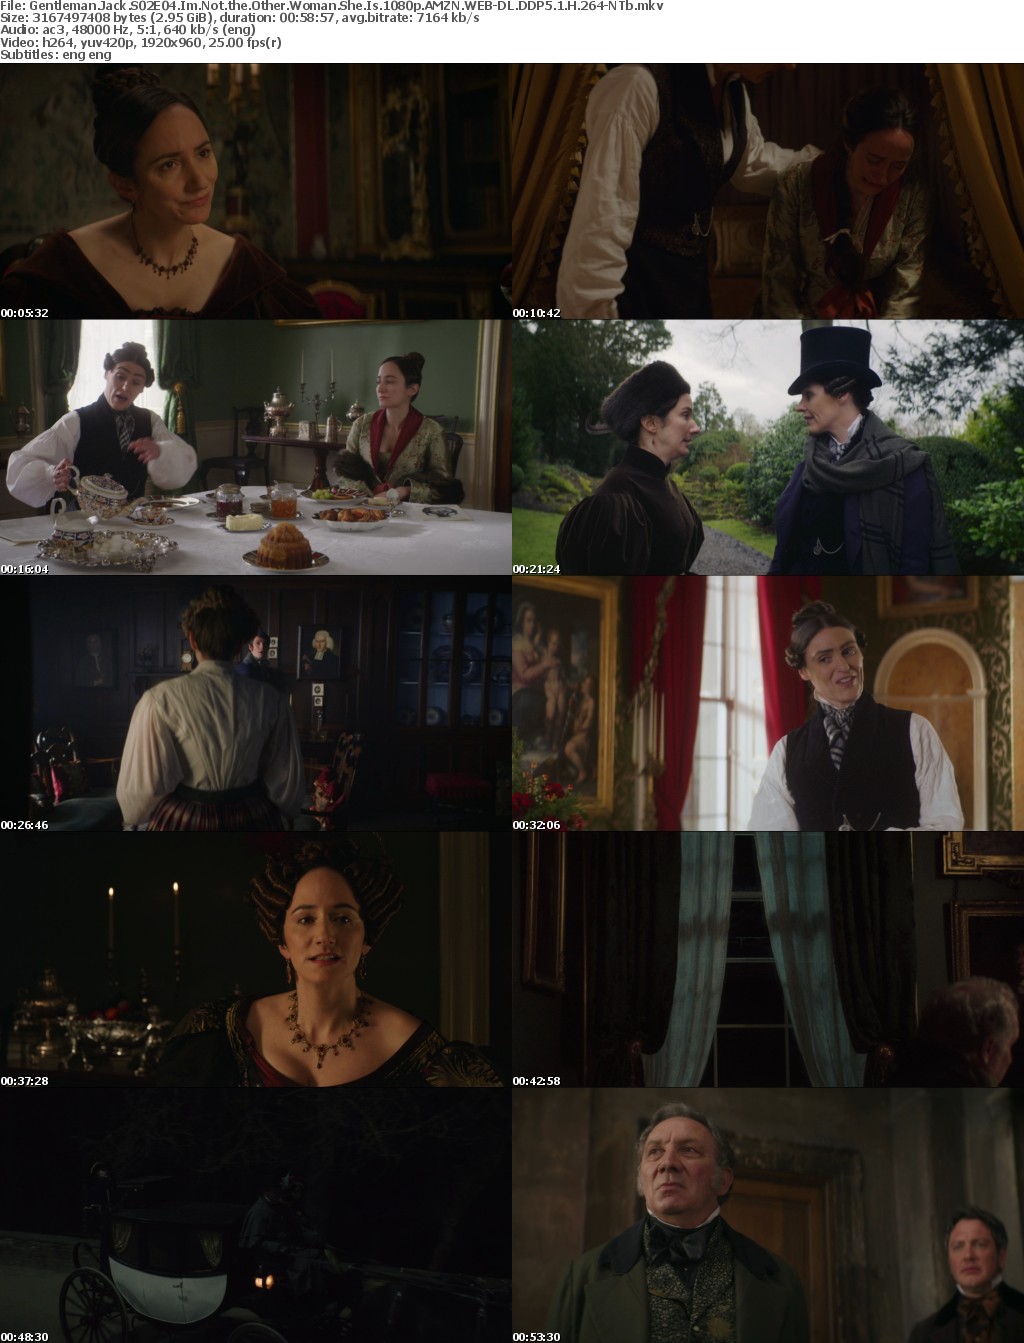 Gentleman Jack S02E04 Im Not the Other Woman She Is 1080p AMZN WEBRip DDP5 1 x264-NTb